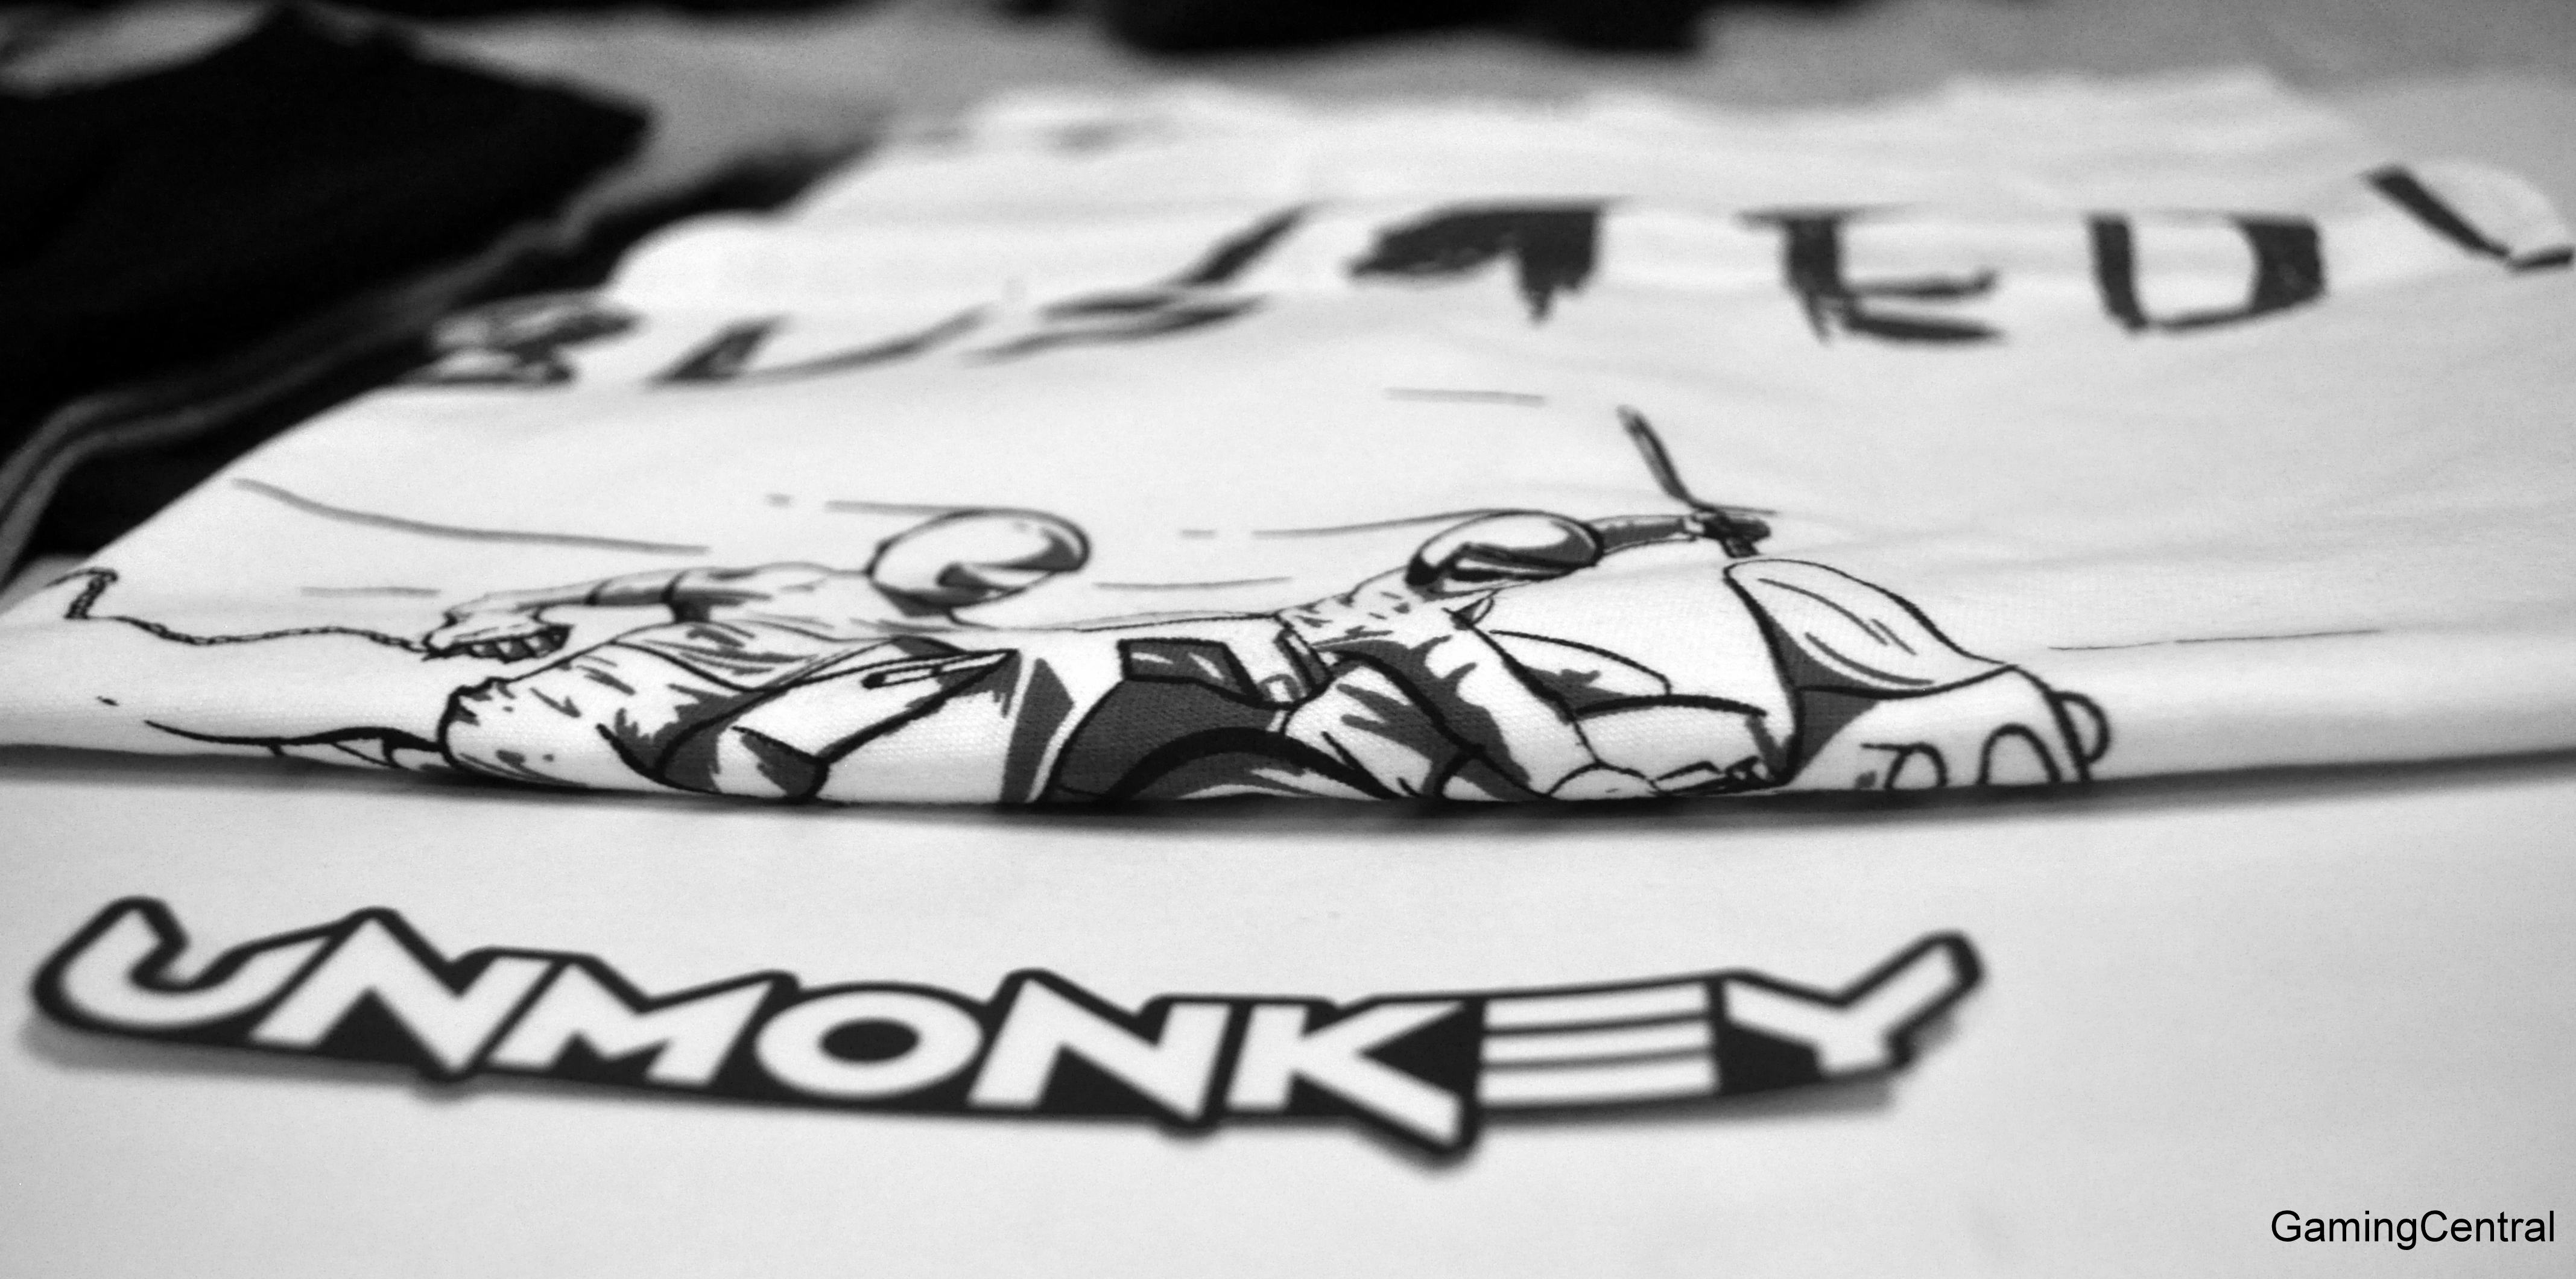 Unmonkey Gaming Merchandise Review - Gaming Central